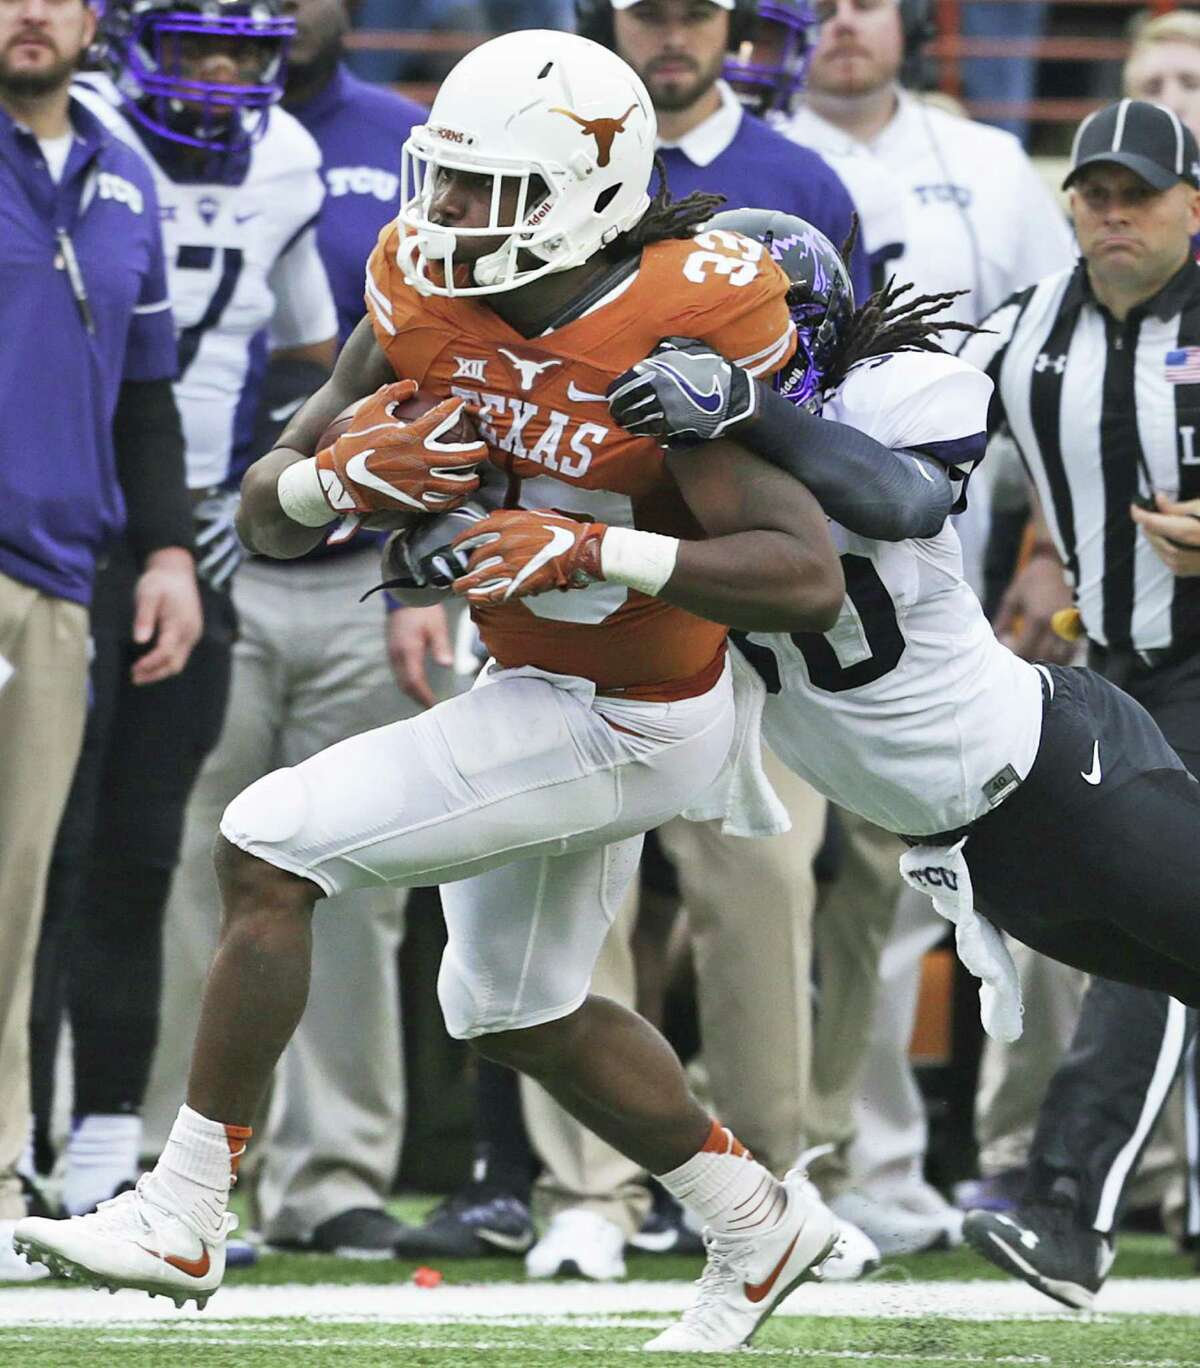 UT running back D’Onta Foreman churns out yards on a long gain in the first half against TCU at Royal-Memorial Stadium on Nov. 25, 2016, in Austin.